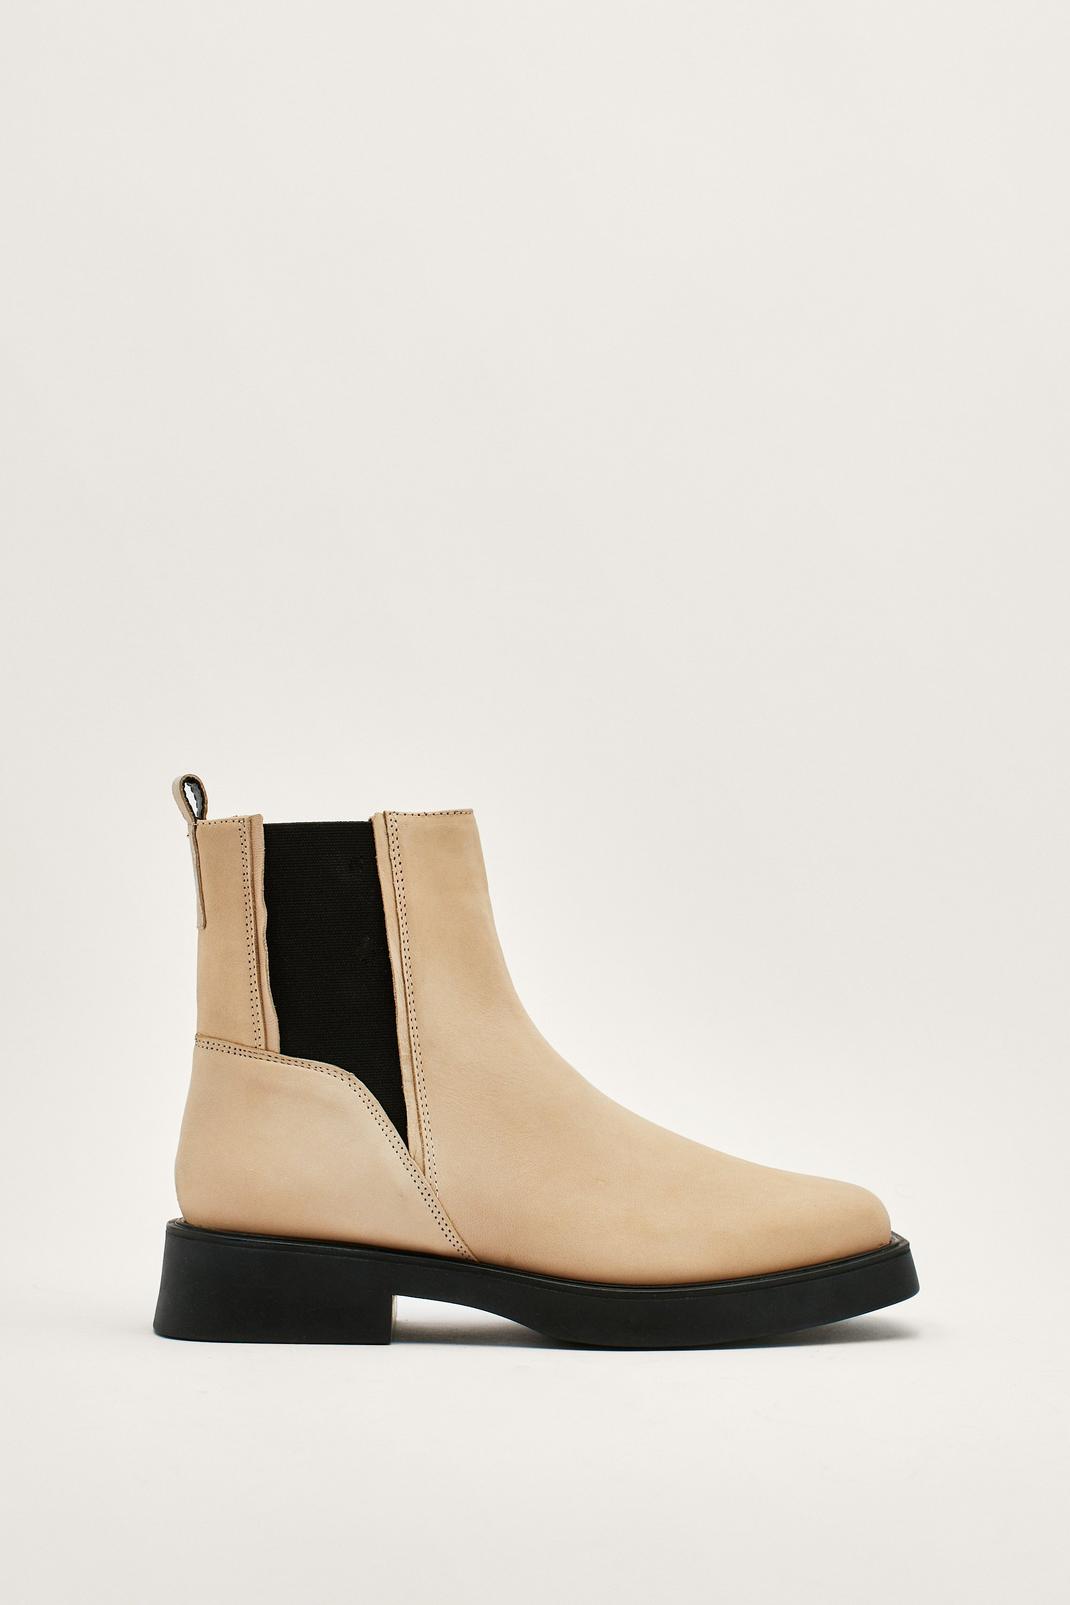 Leather Square Toe Chelsea Boots | Nasty Gal